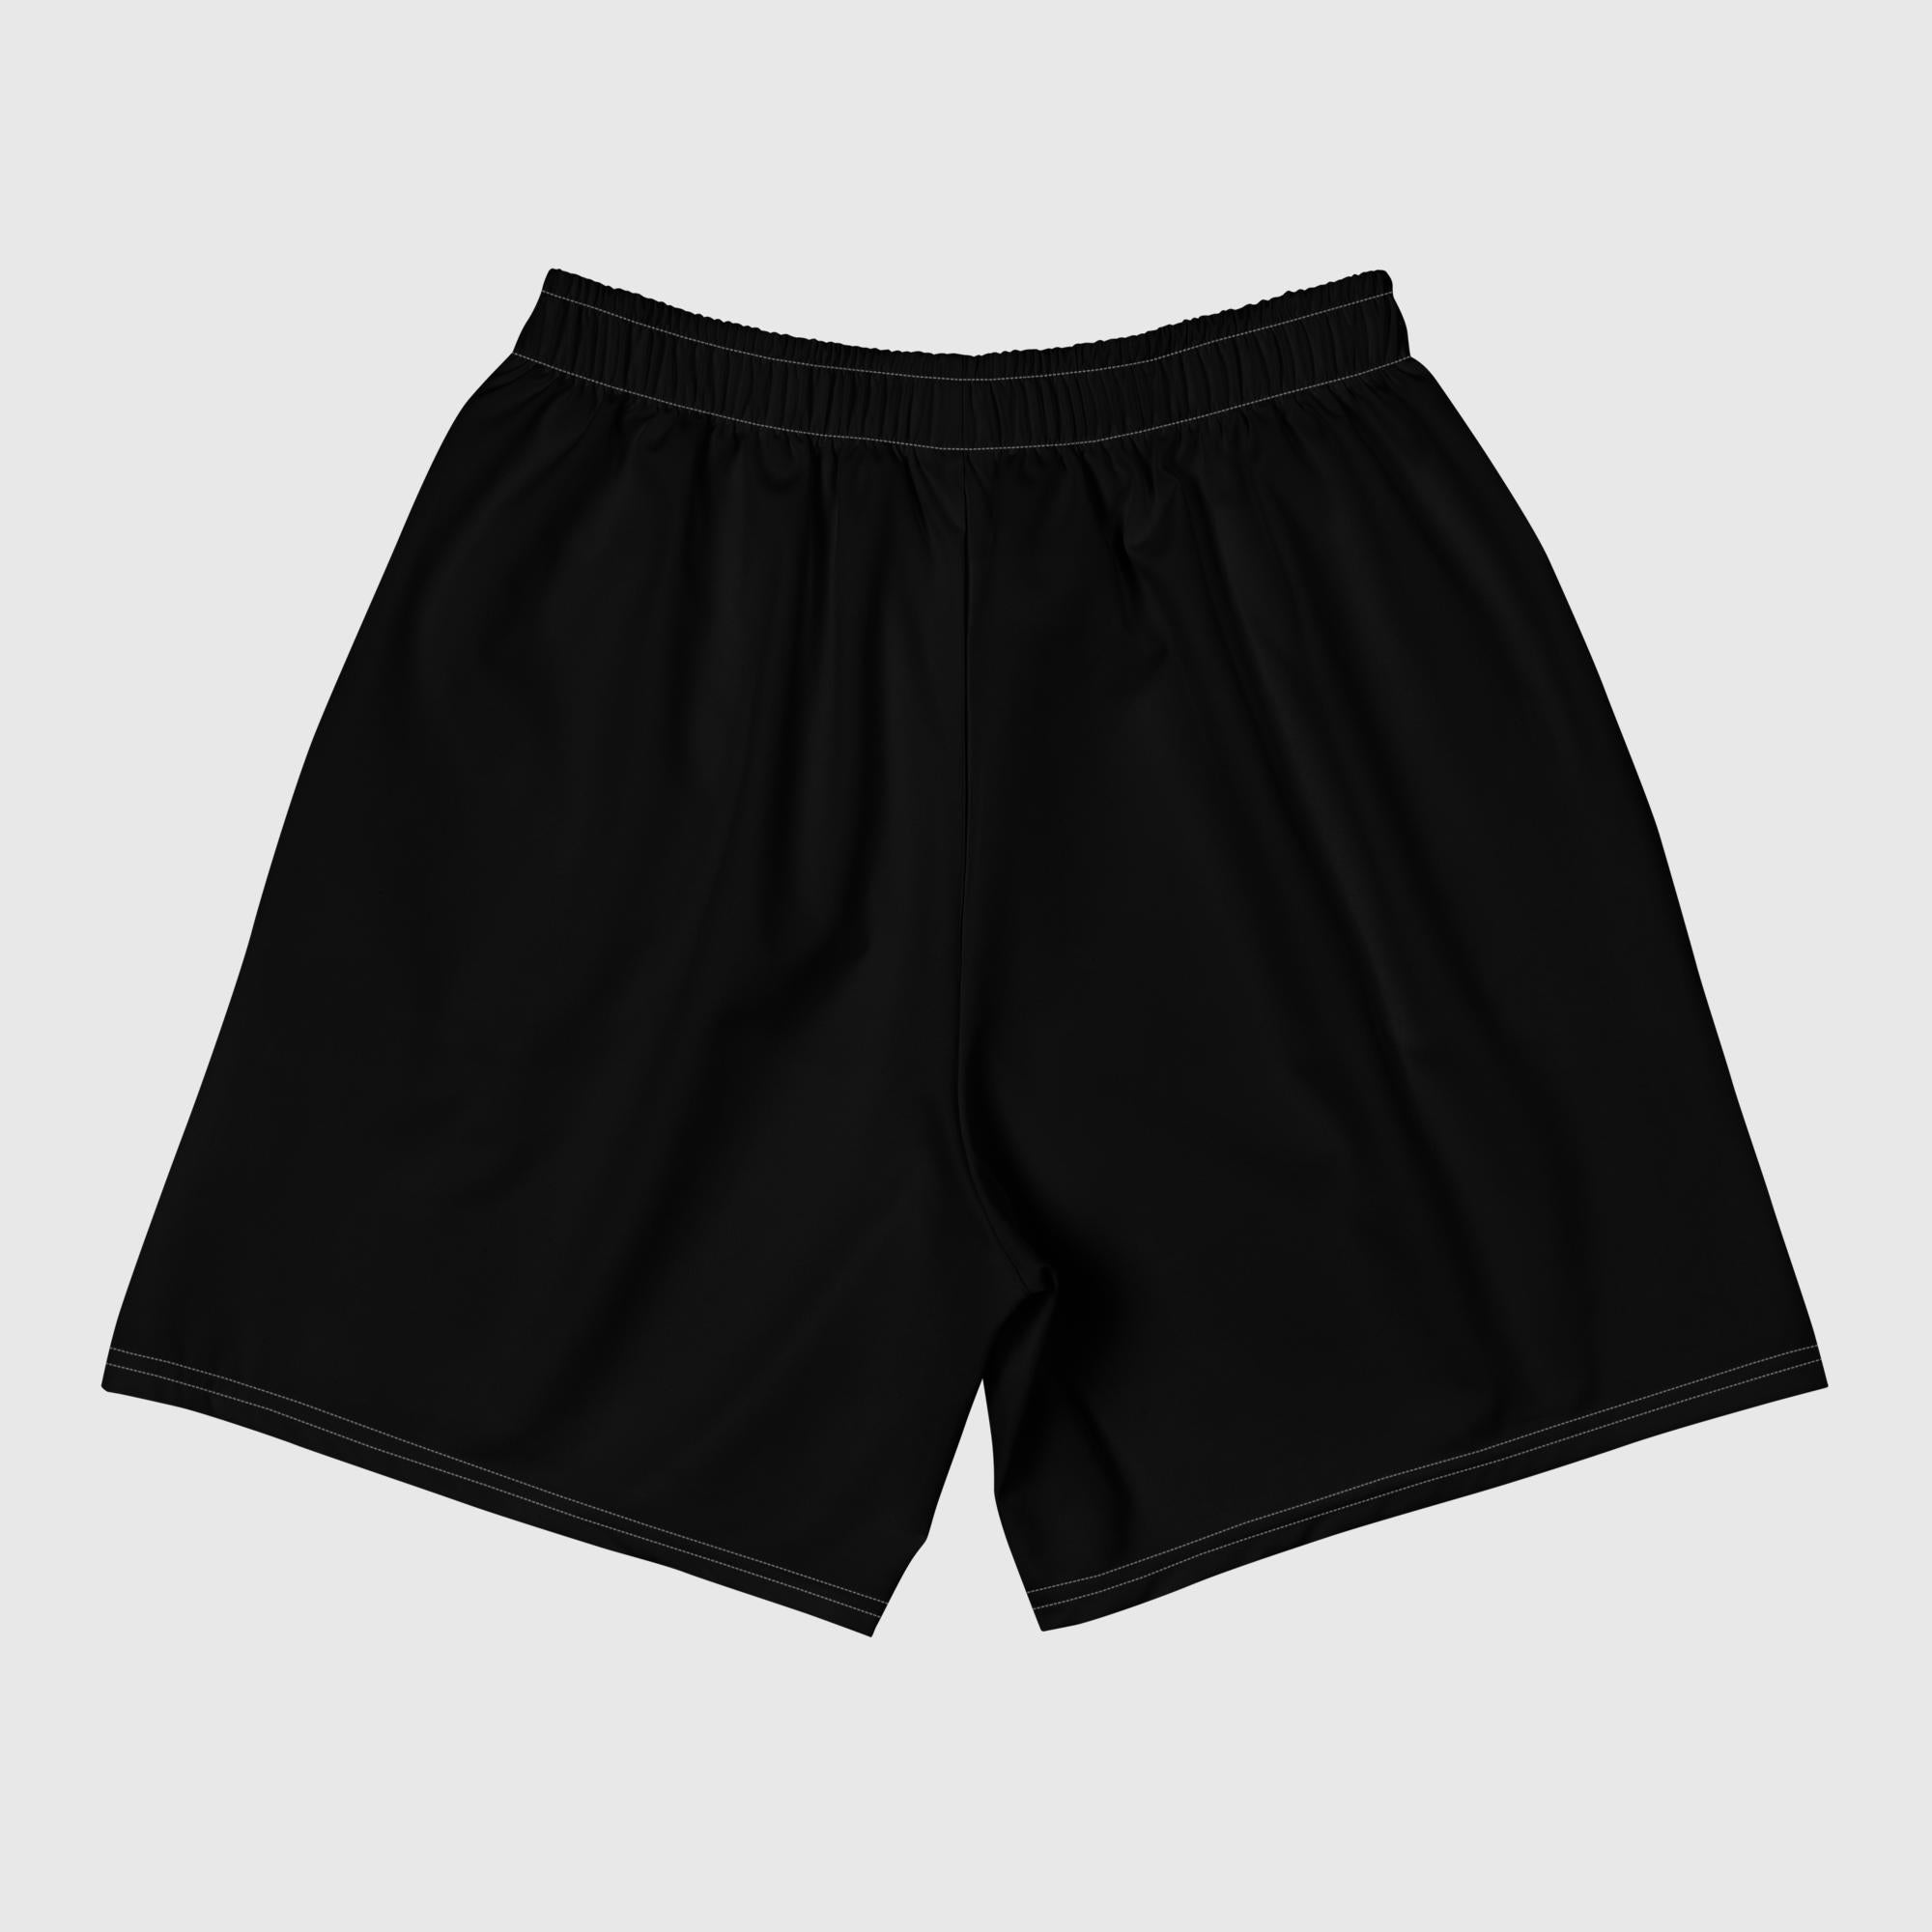 Men's Recycled Athletic Shorts - Black